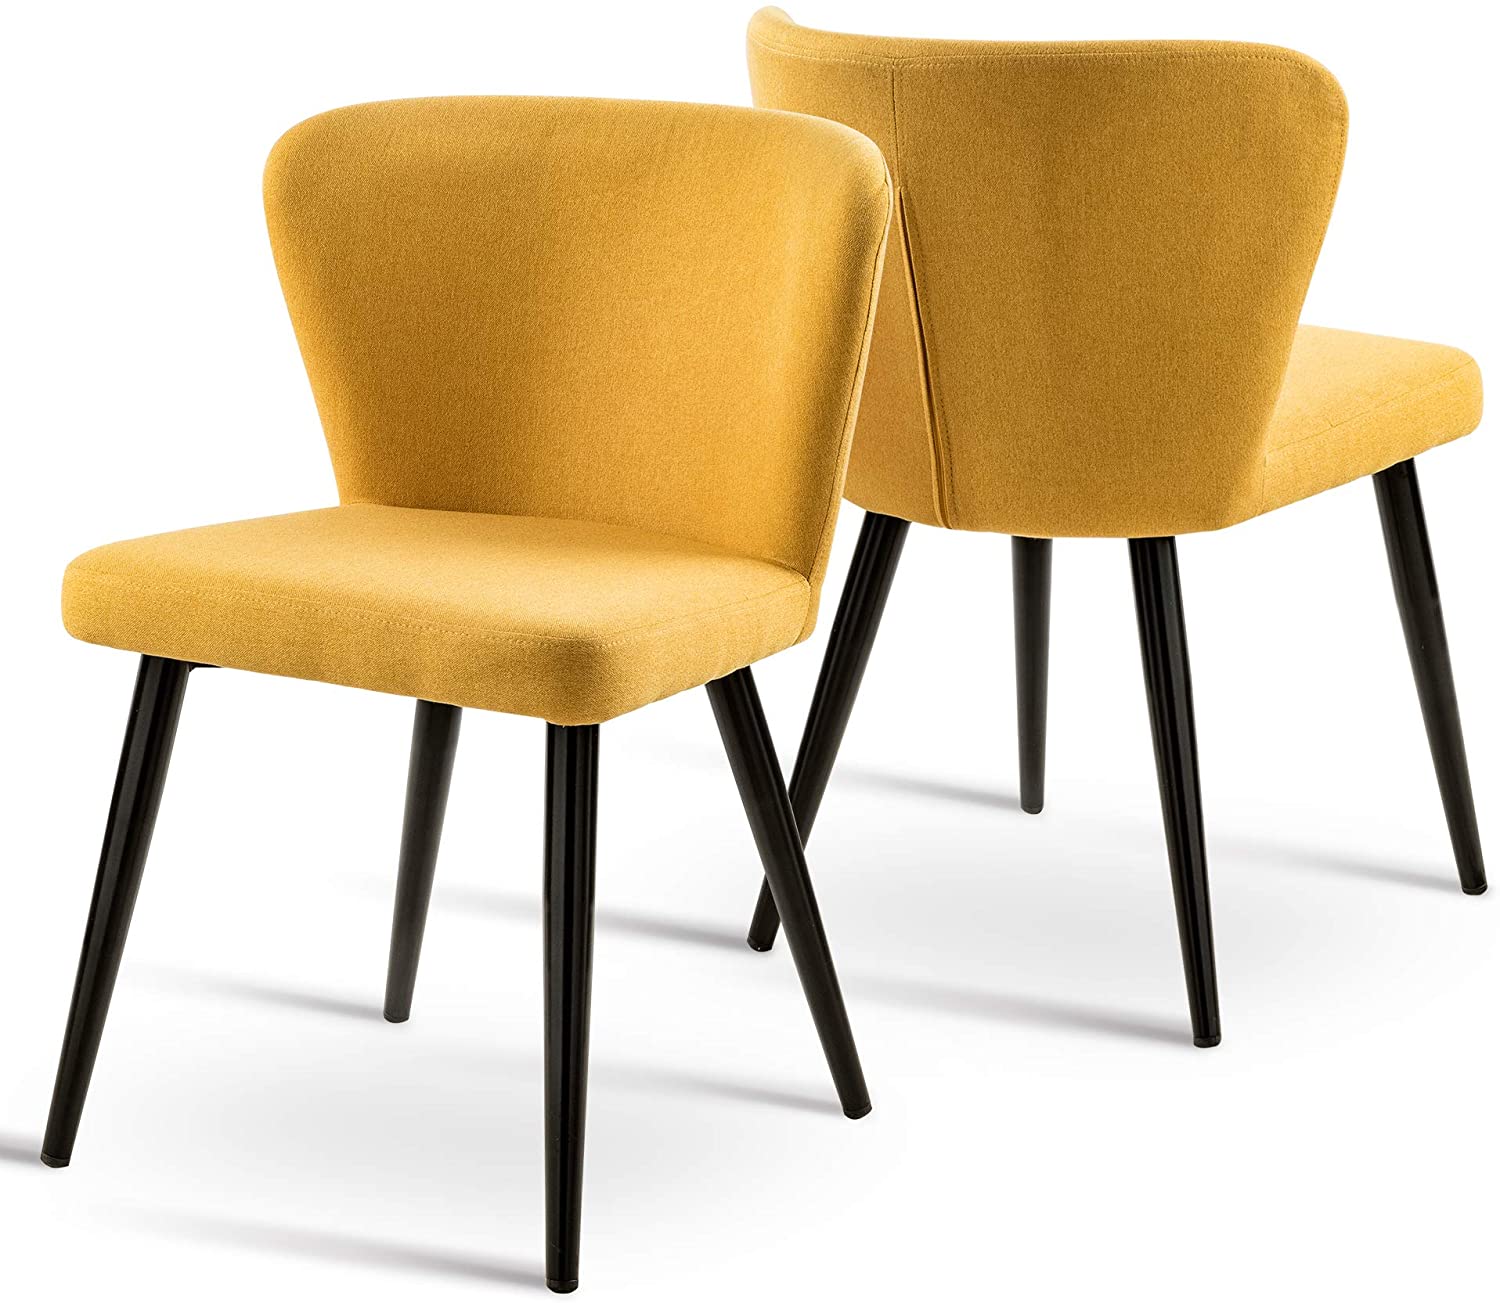 Modern Living Room Accent Armless Chairs Set of 2 Yellow Linen Fabric Mid Century Kitchen Chairs Boho Chairs Upholstered Side Chairs with Metal Legs for Dining Room Living Room Bedroom Kitchen,6090-5987